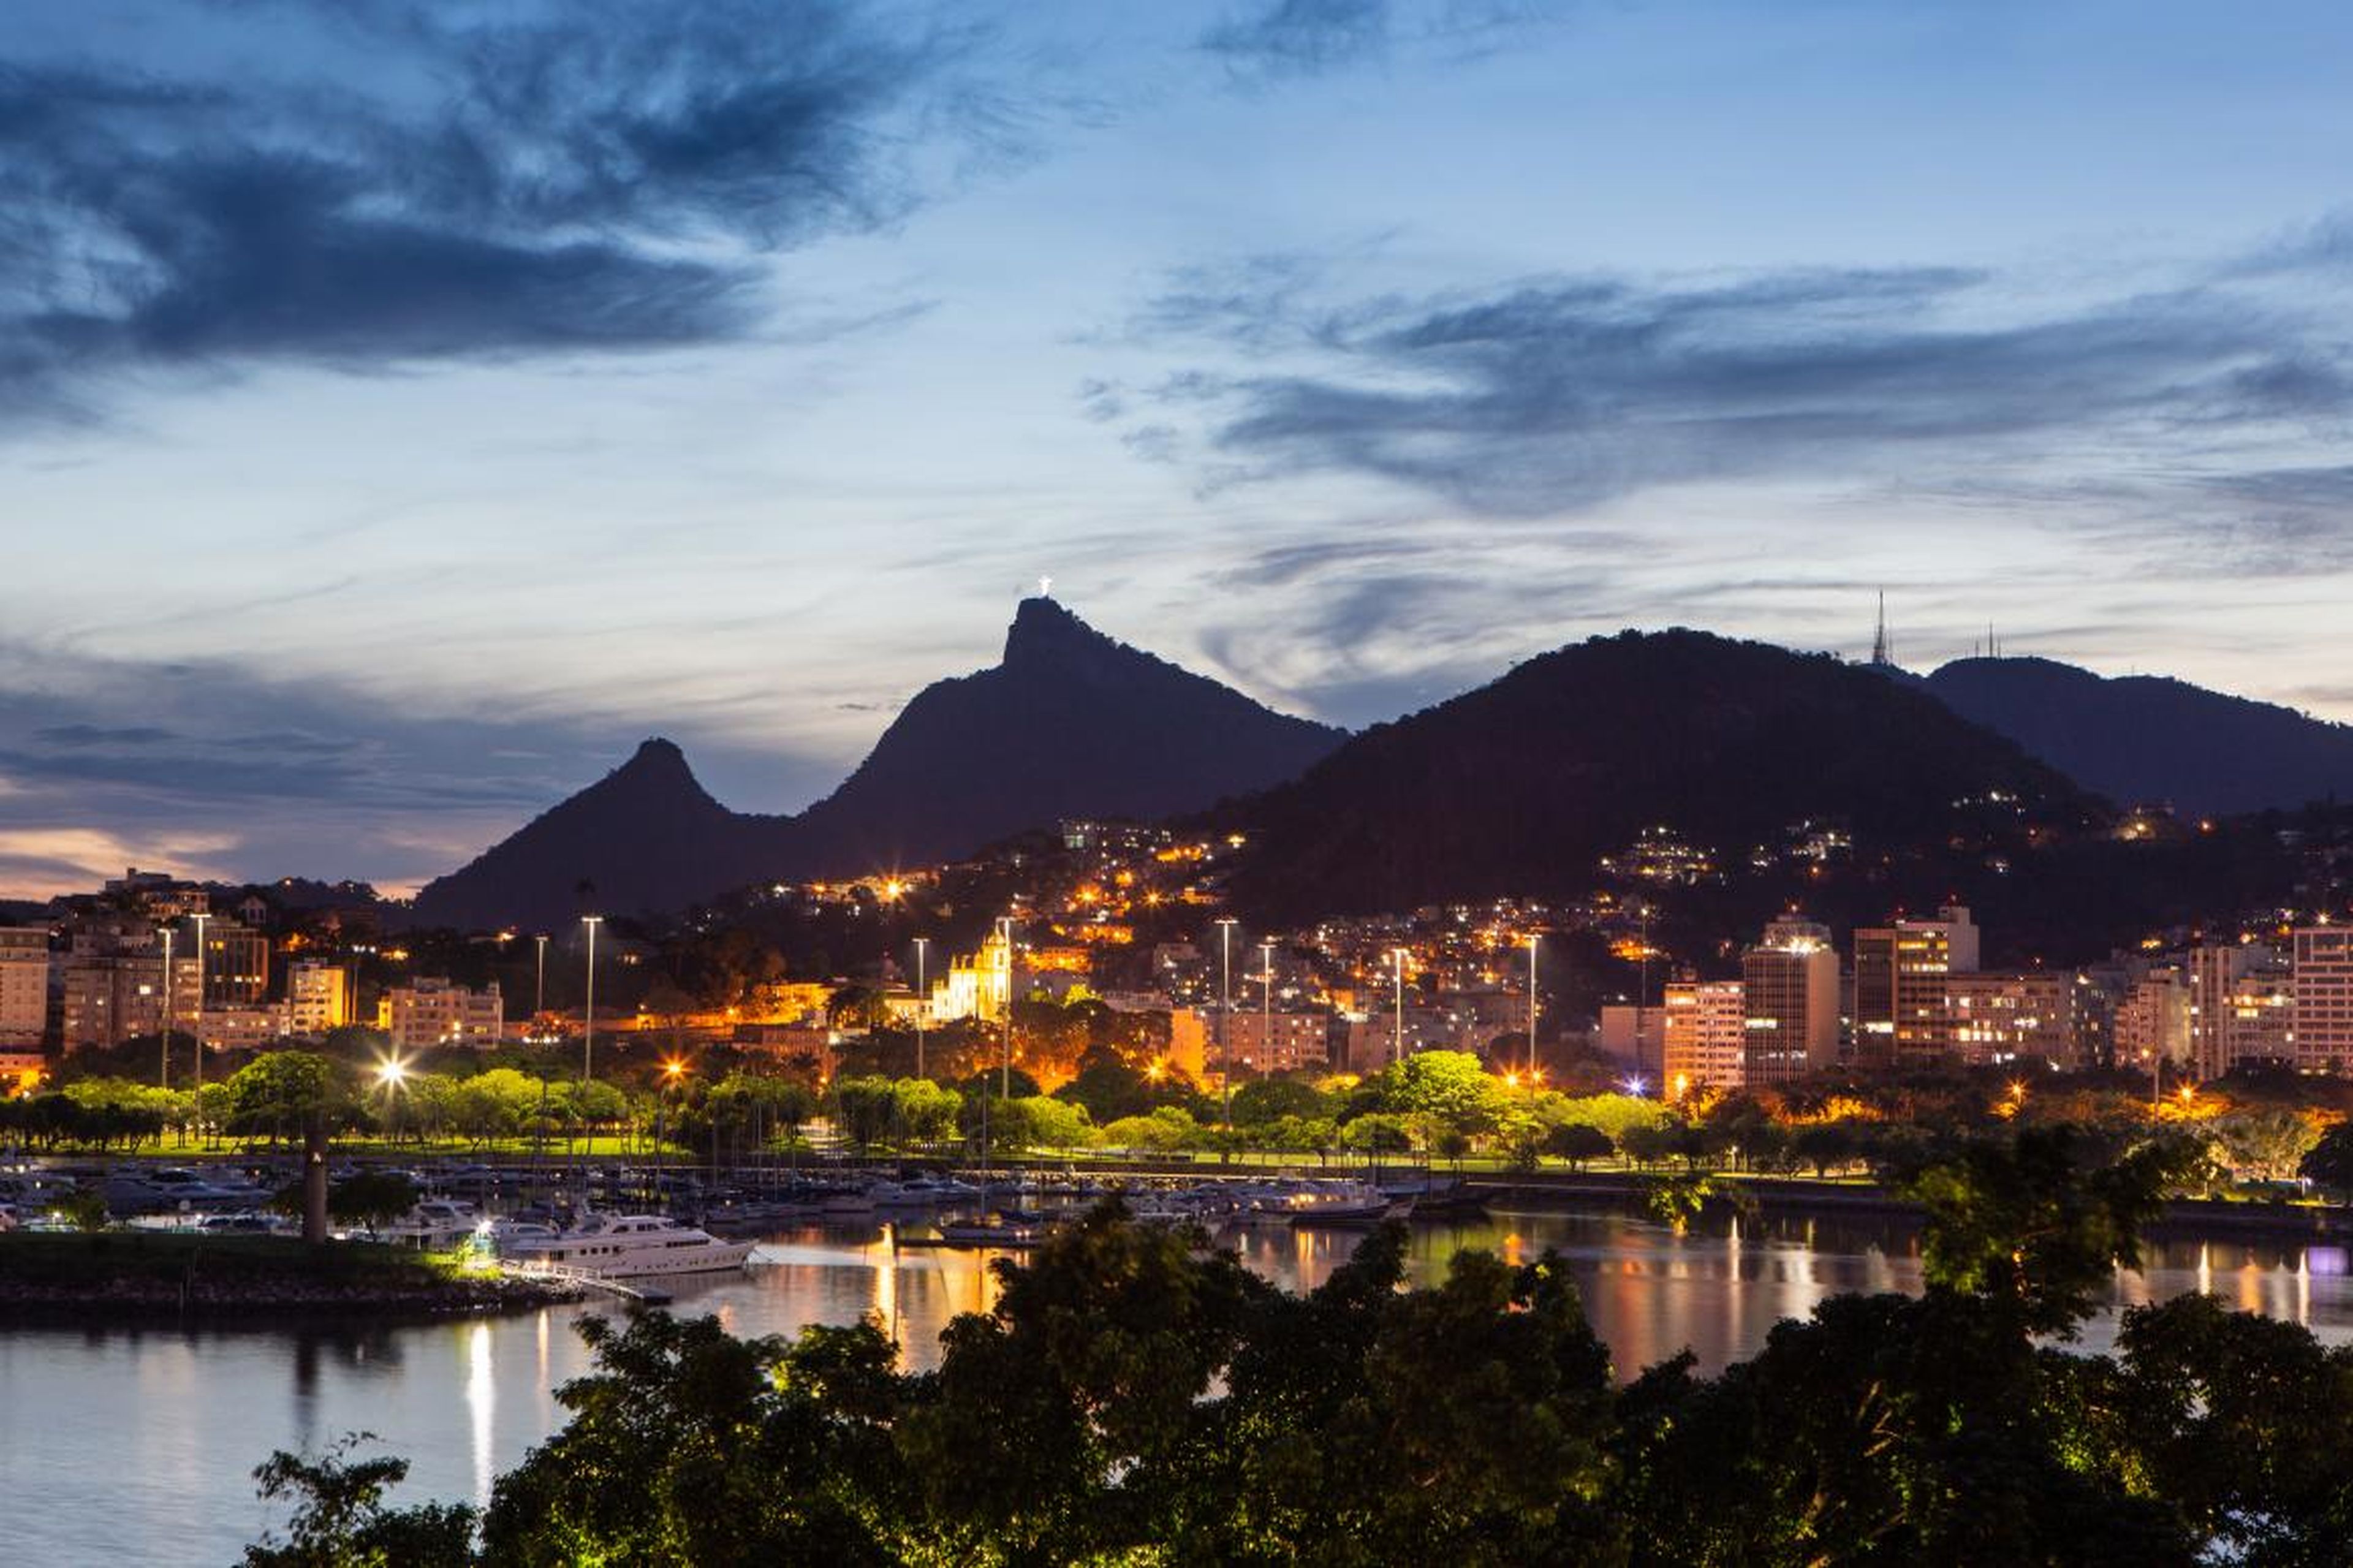 24. Rio De Janeiro is one of the top tourist destinations in the world and home to around 6.7 million people.